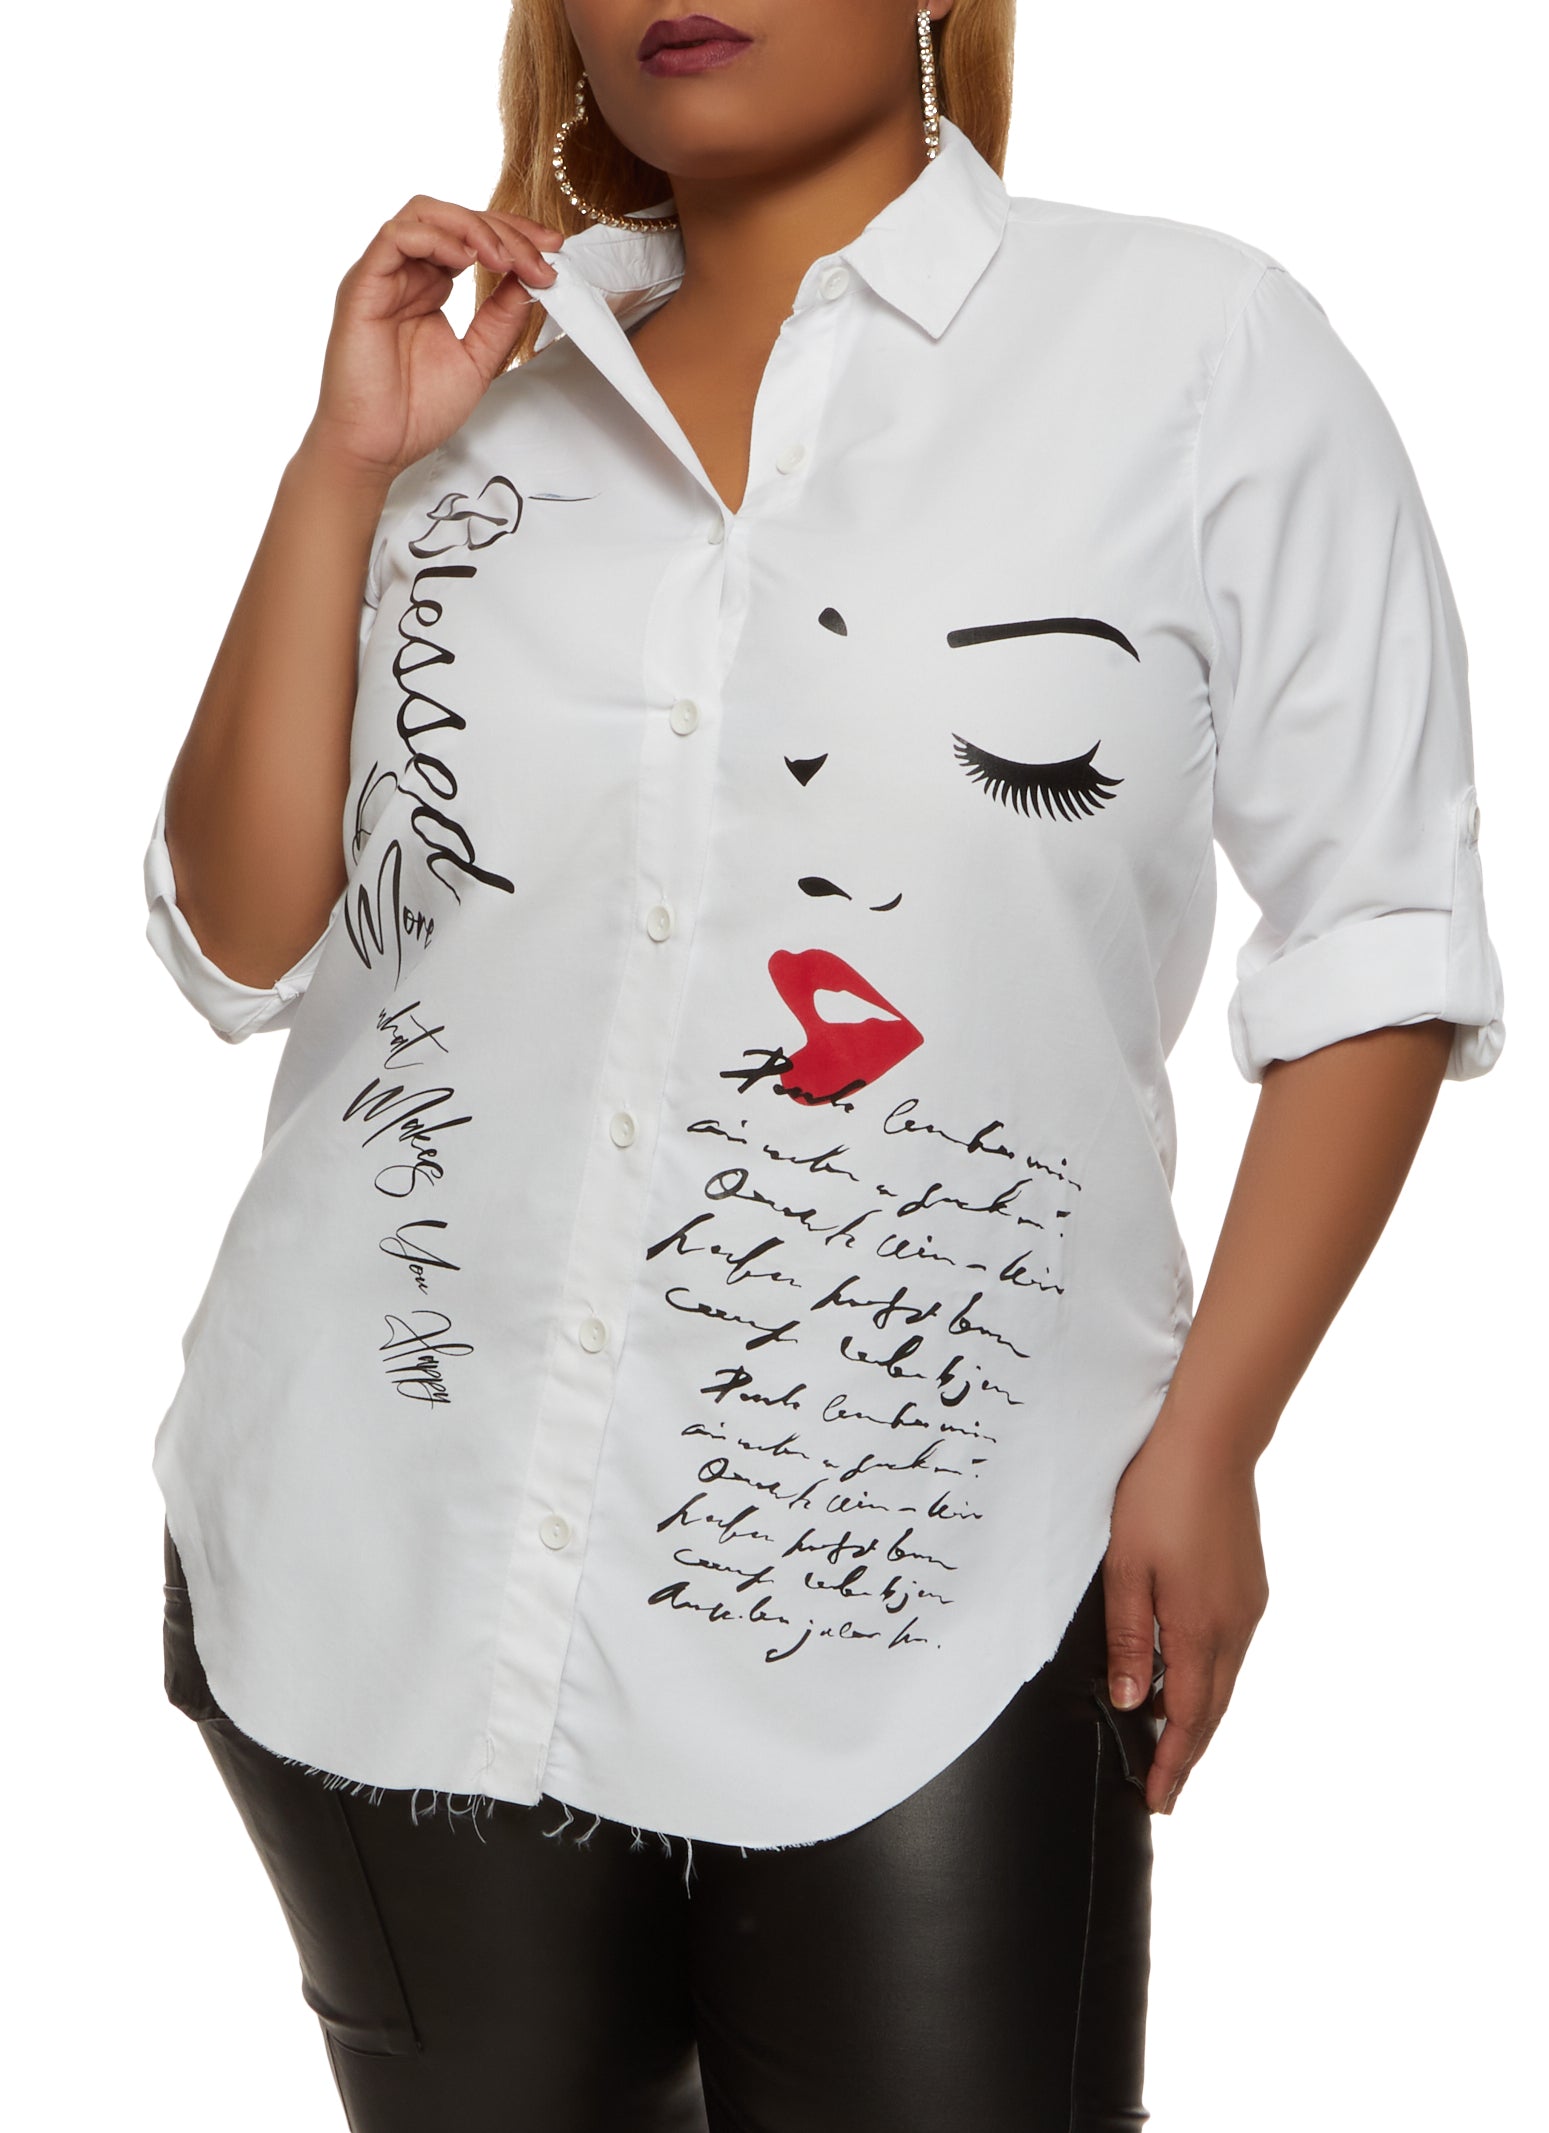 Plus Size White Tops, Everyday Low Prices